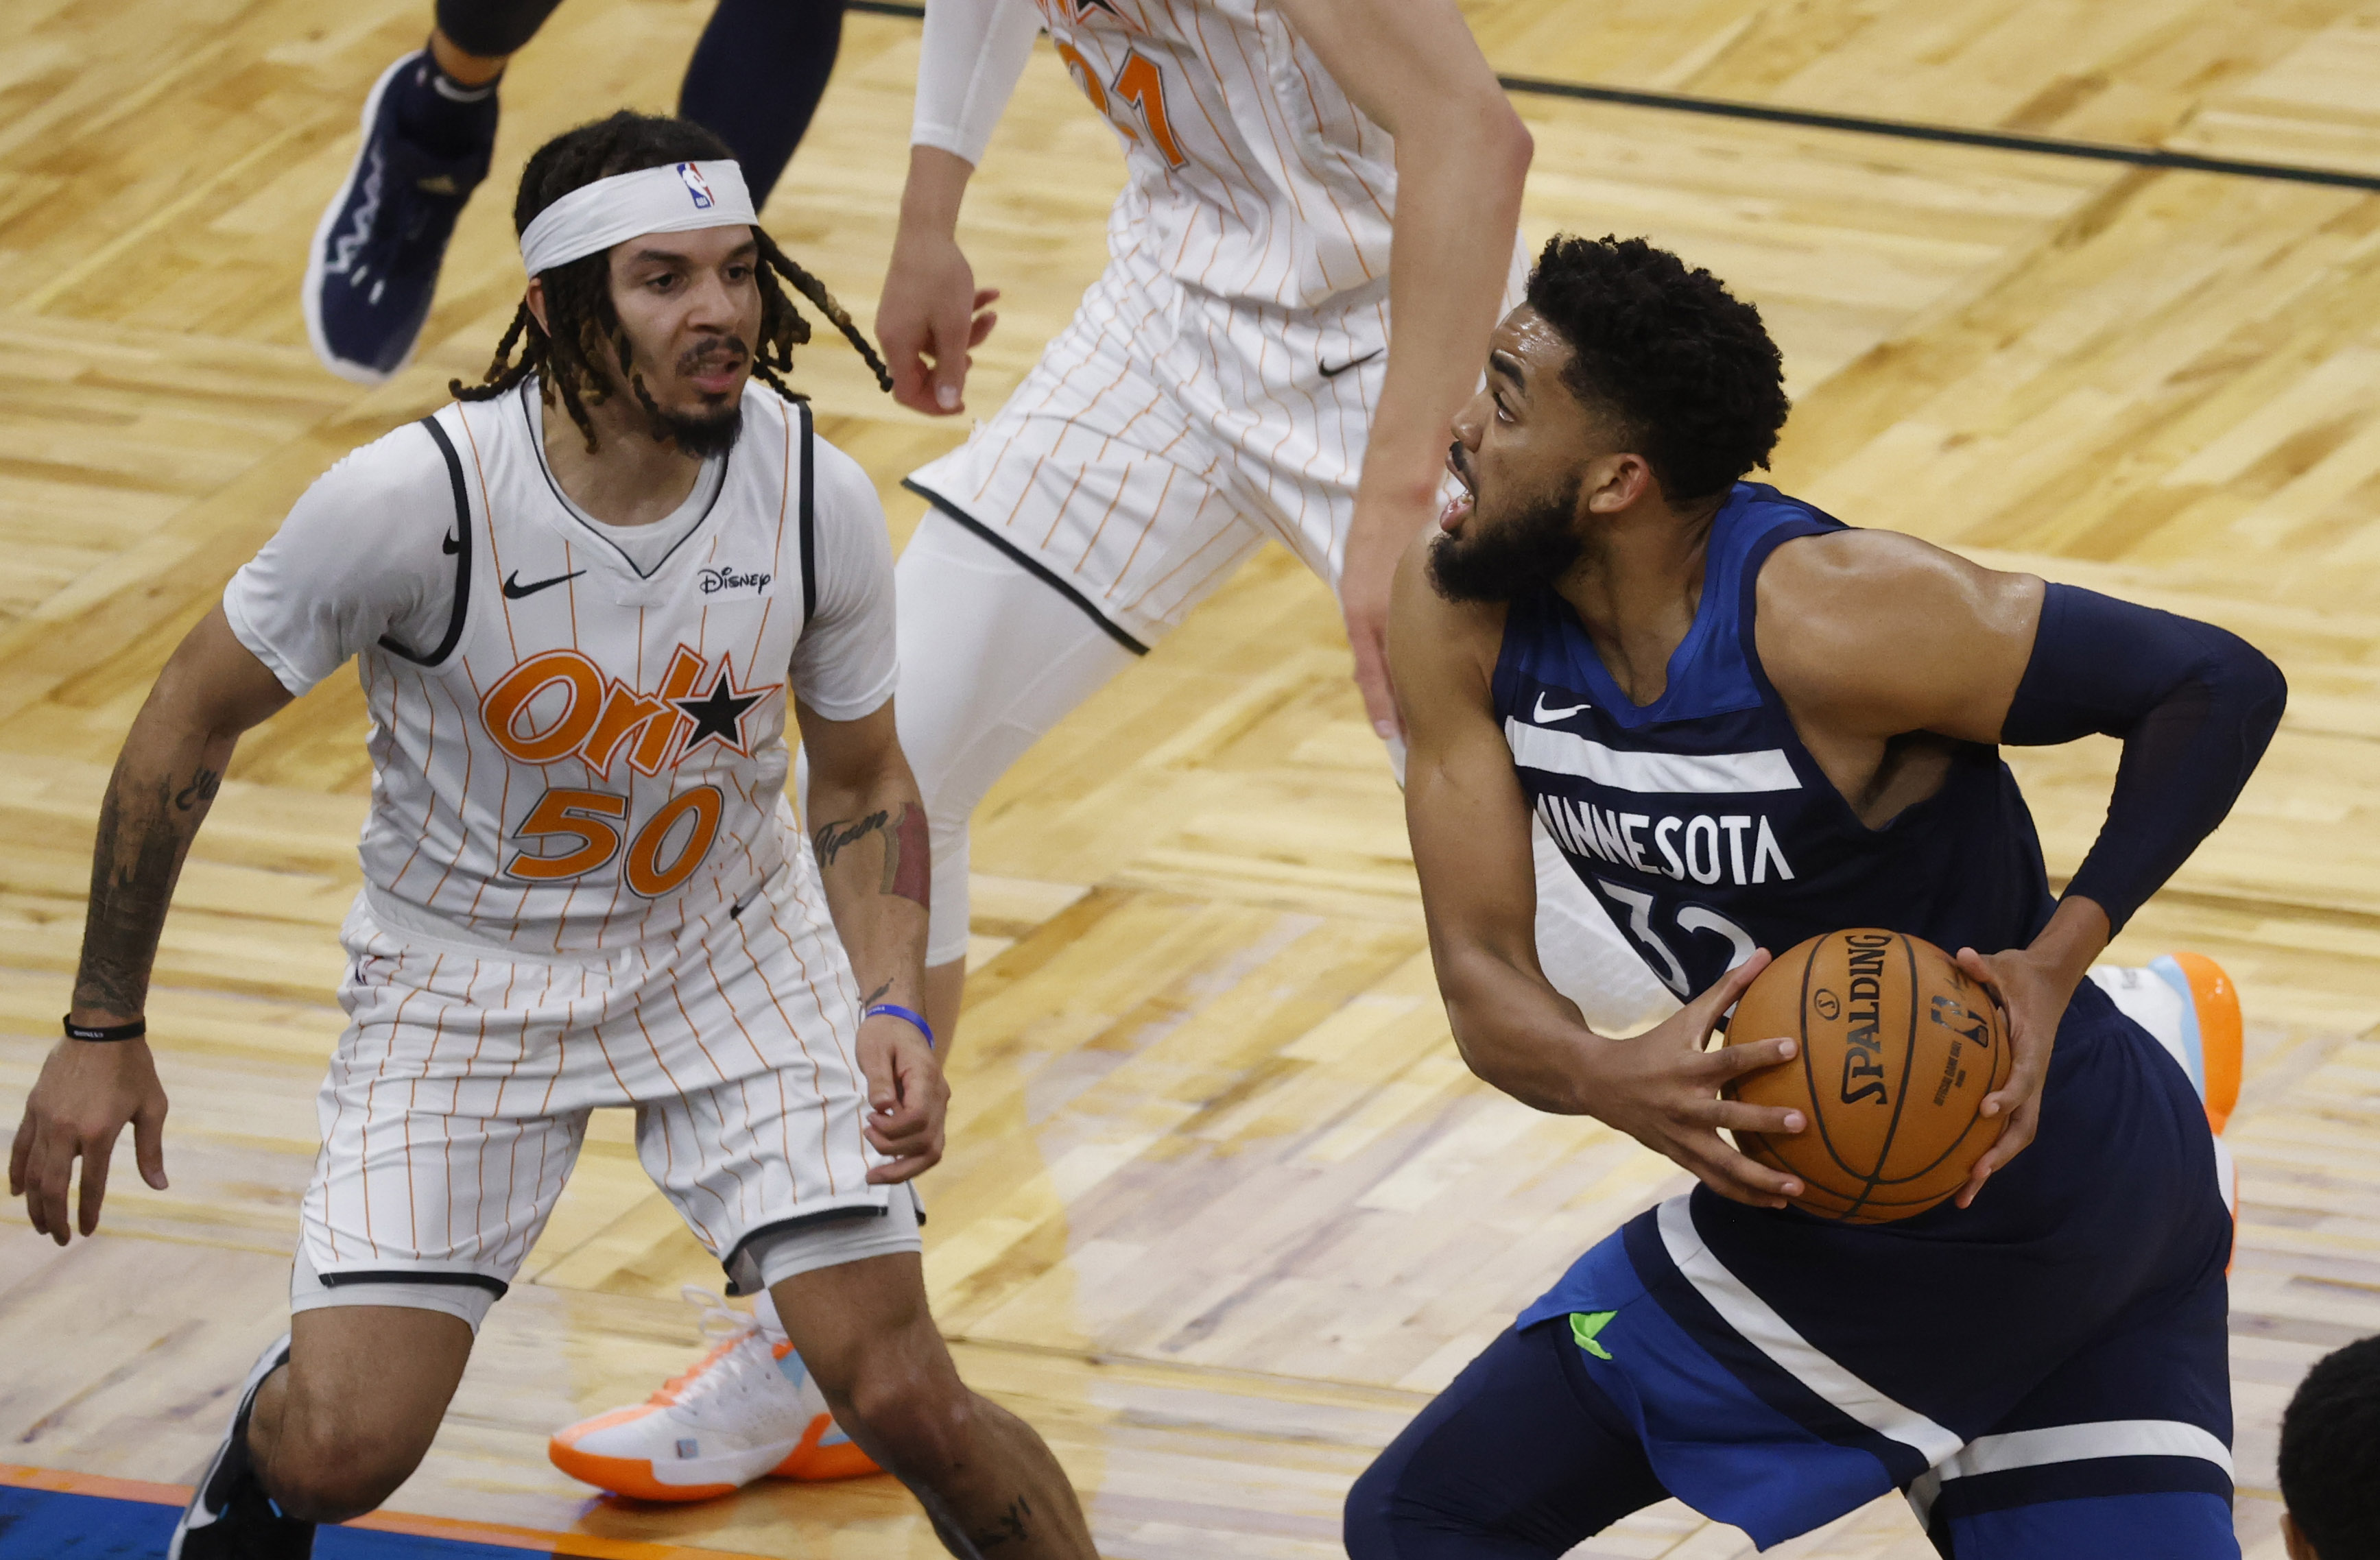 May 9, 2021; Orlando, Florida, USA; Minnesota Timberwolves center Karl-Anthony Towns (32) drives to the basket as Orlando Magic guard Cole Anthony (50) defends during the second half at Amway Center. Mandatory Credit: Kim Klement-USA TODAY Sports